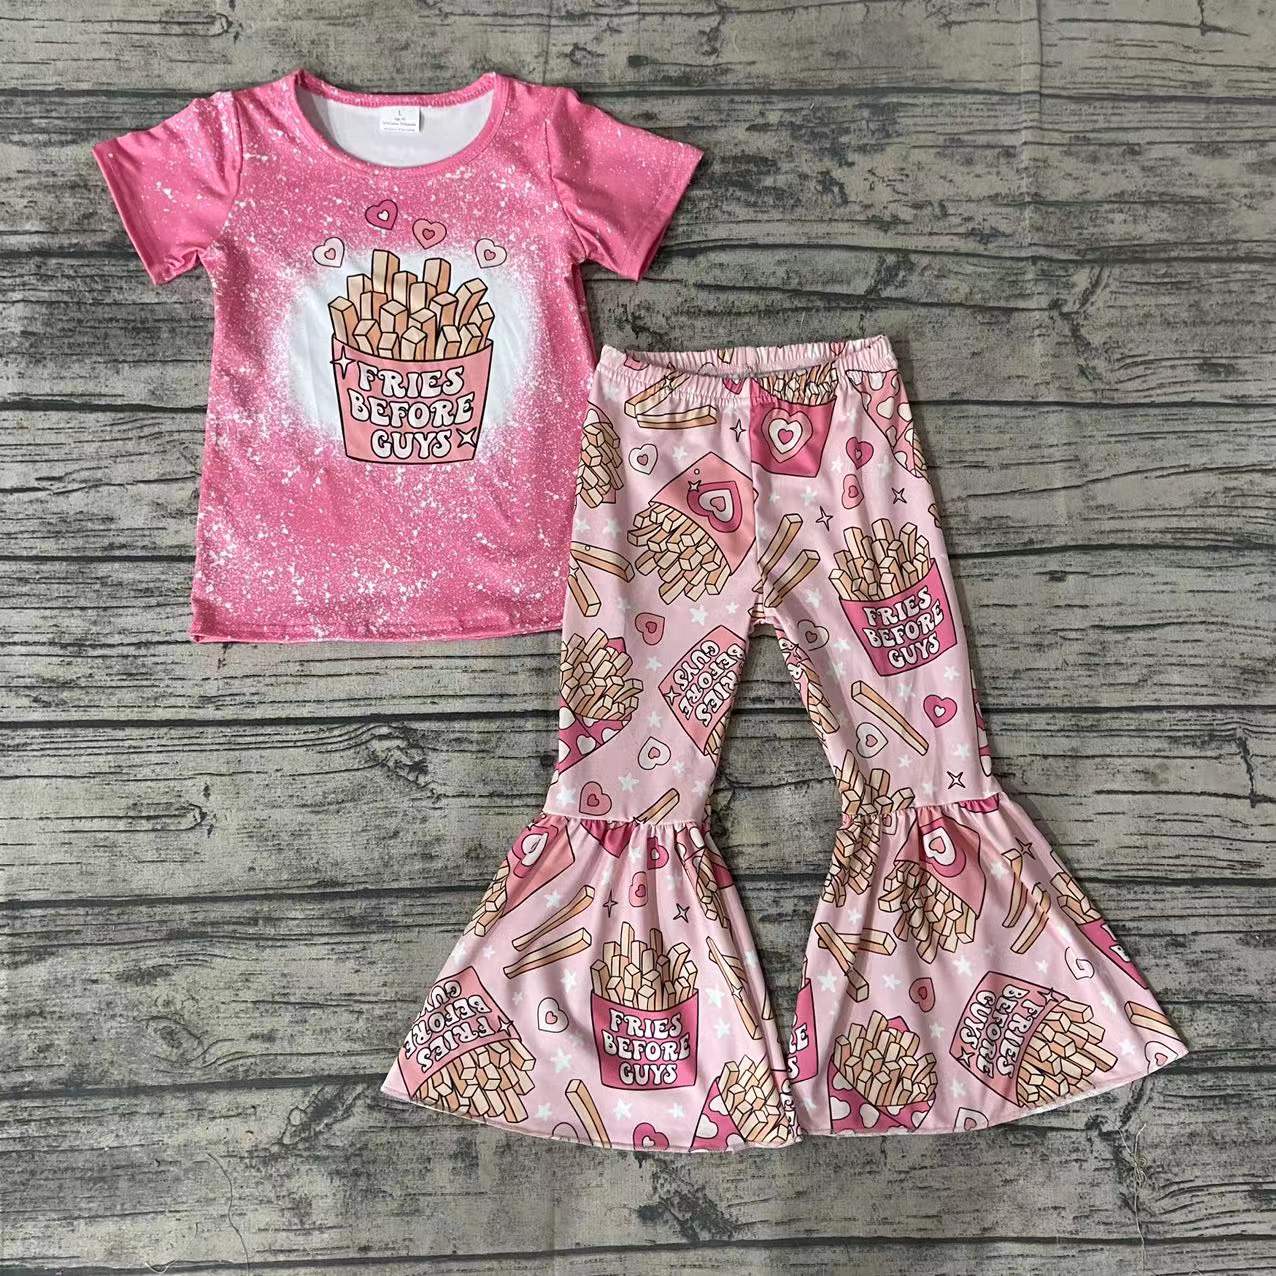 Baby Girls Fries before Guys Valentines bell bottom pants sets